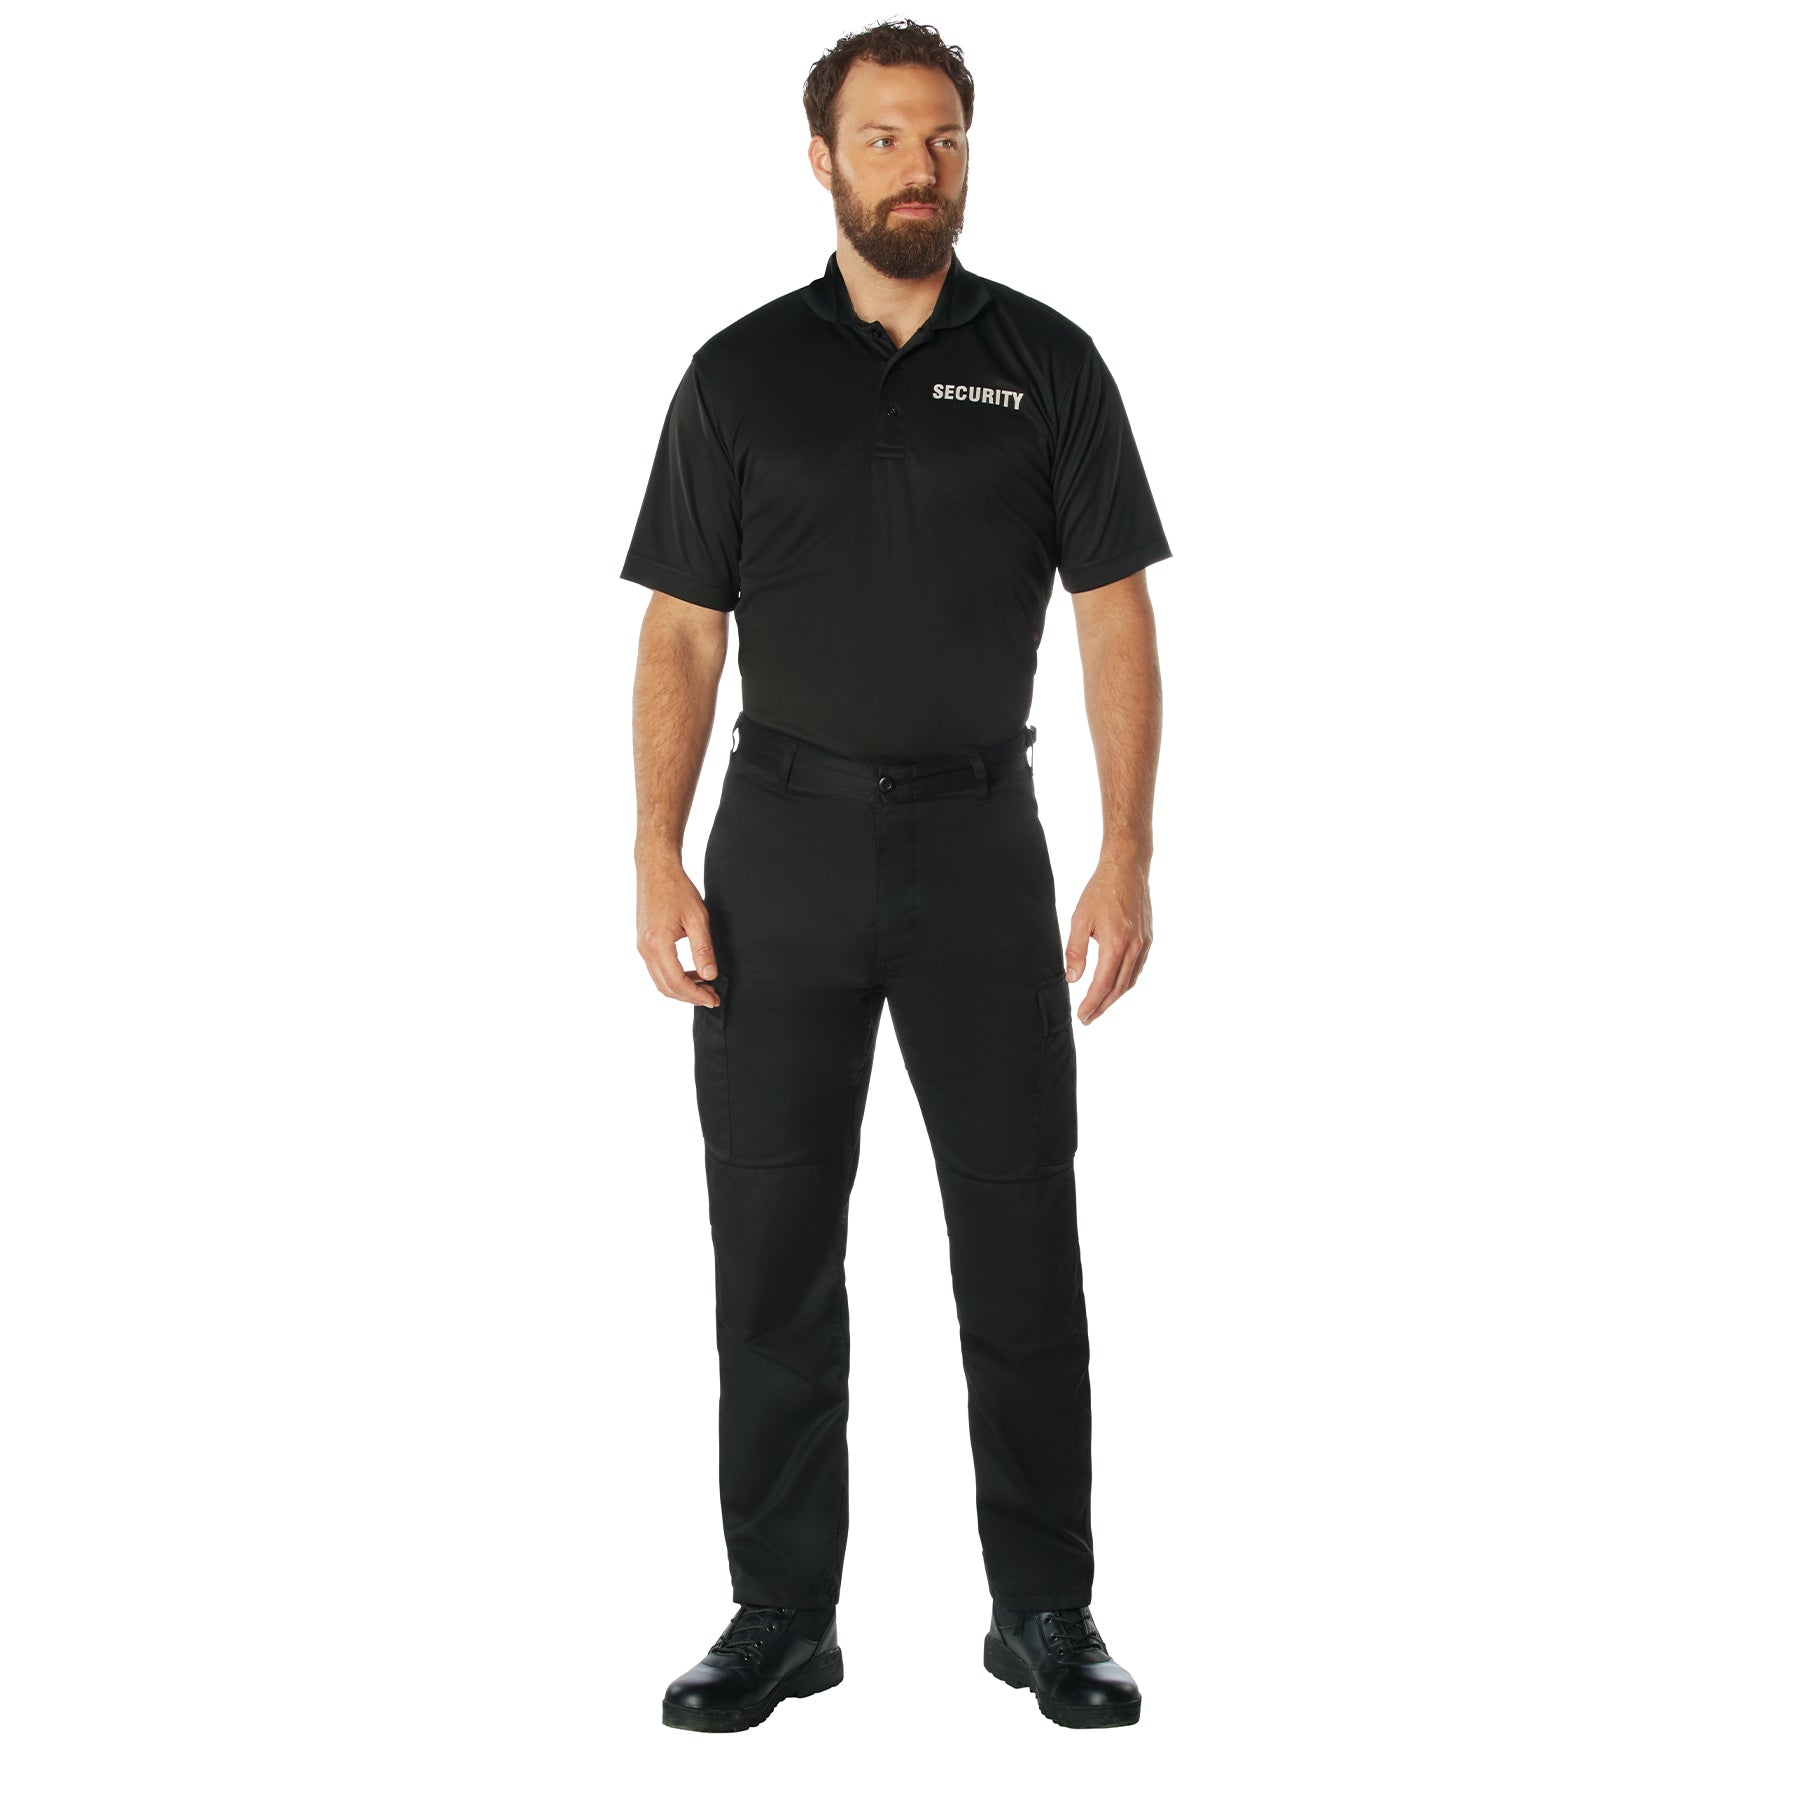 [Public Safety] Poly Moisture Wicking Security Polo T-Shirts